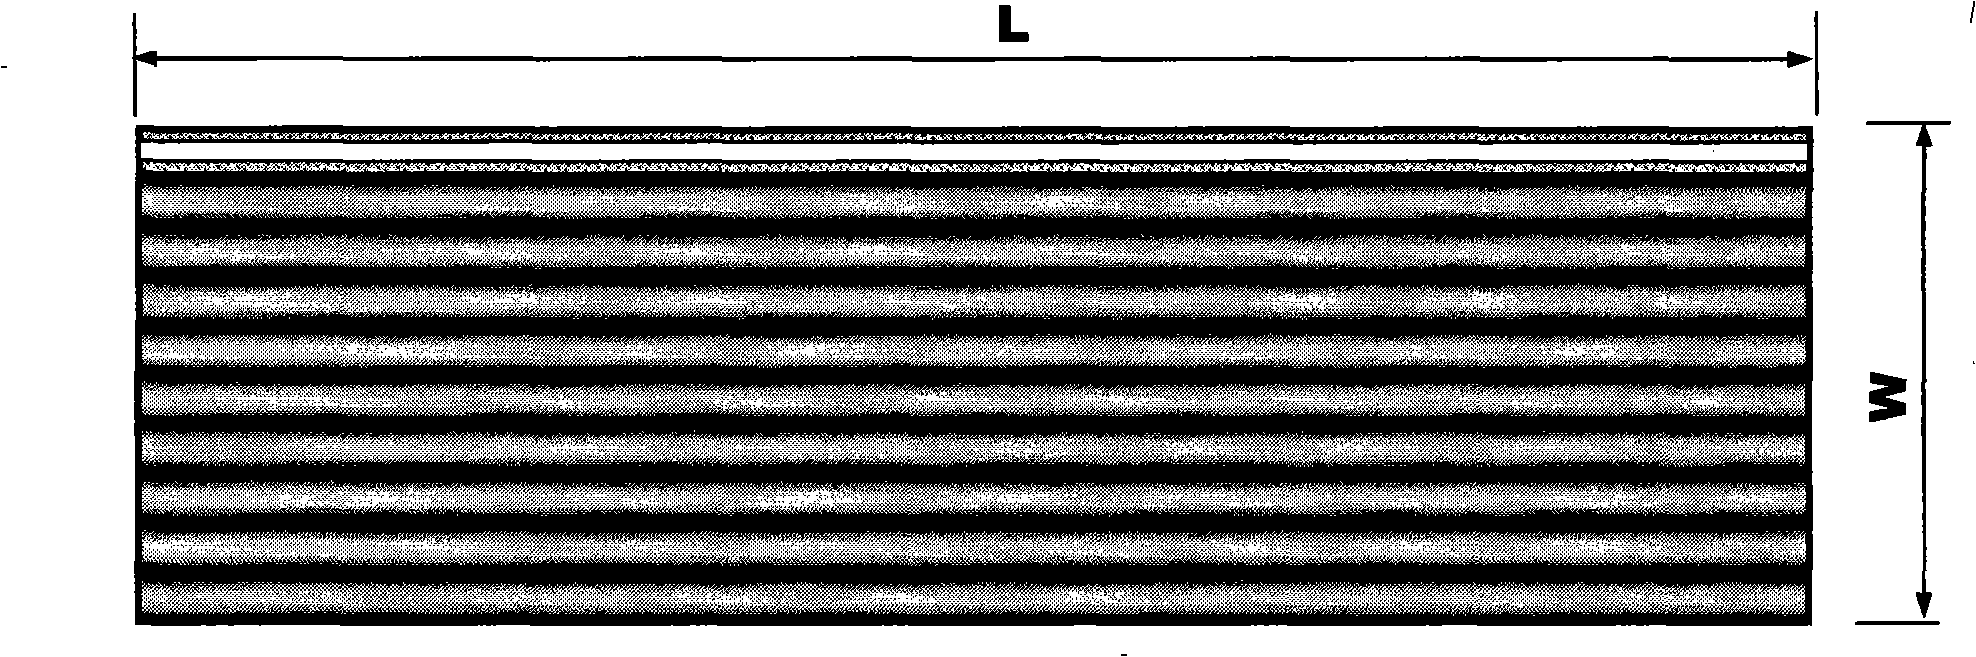 Plate shaped ceramic film composed of multiple hollow fiber ceramic films by parallel connection and preparation thereof